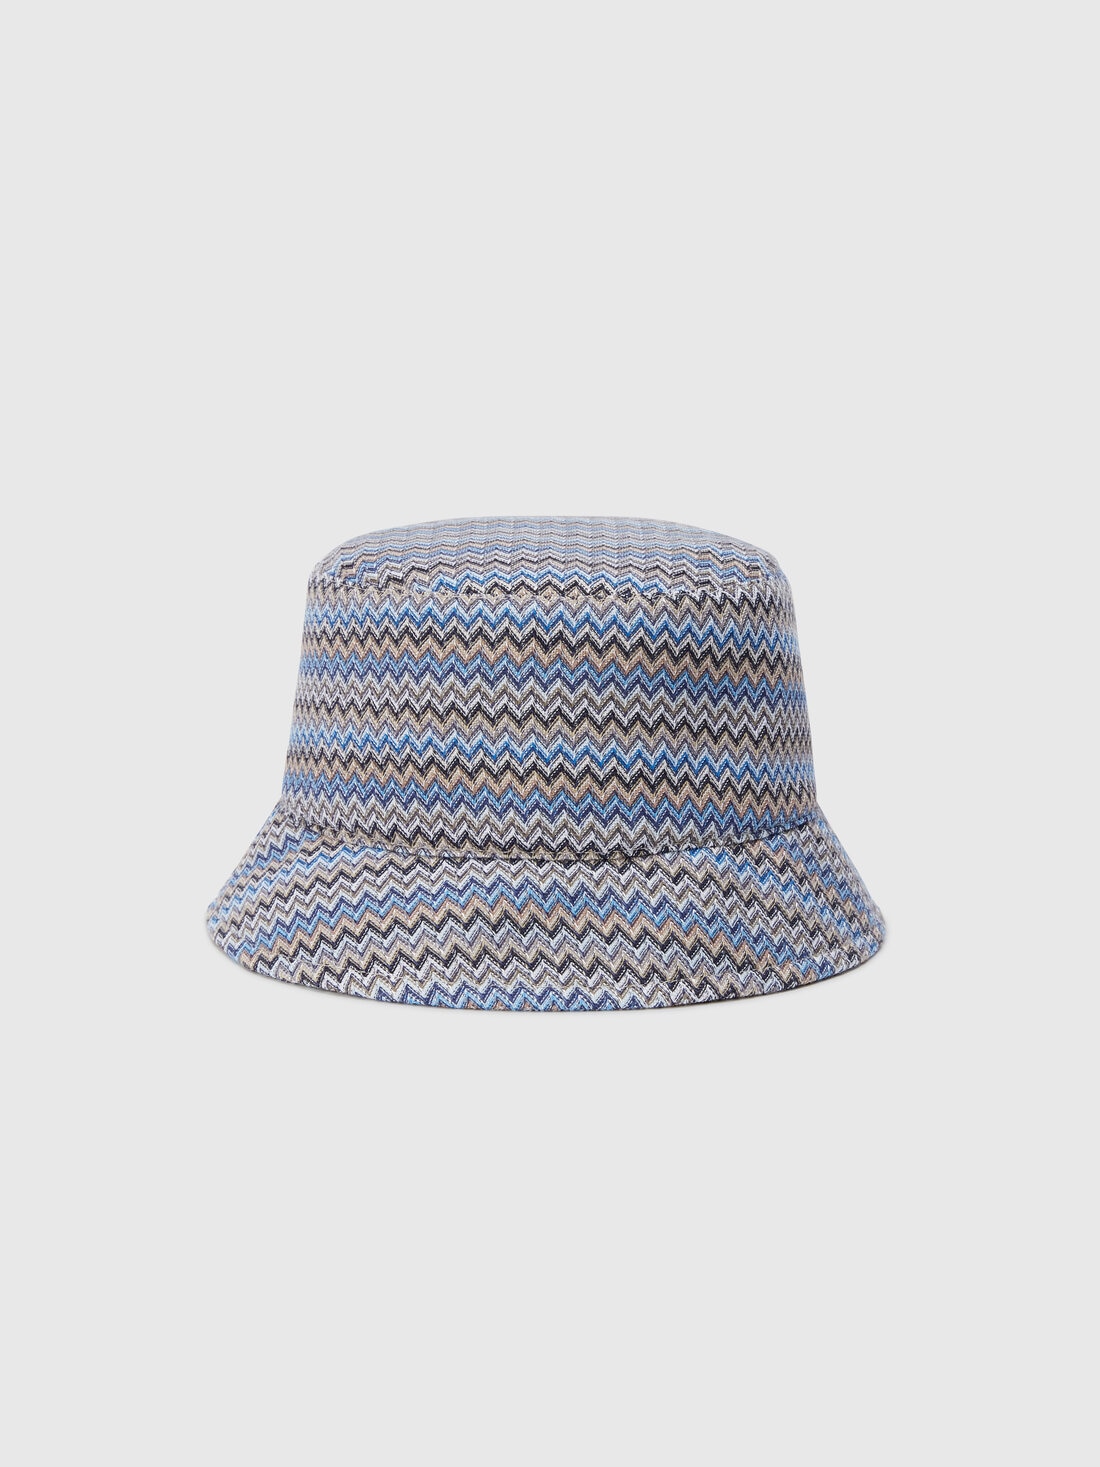 Bucket hat in viscose and cotton with zigzag pattern, Multicoloured  - 8053147141299 - 0